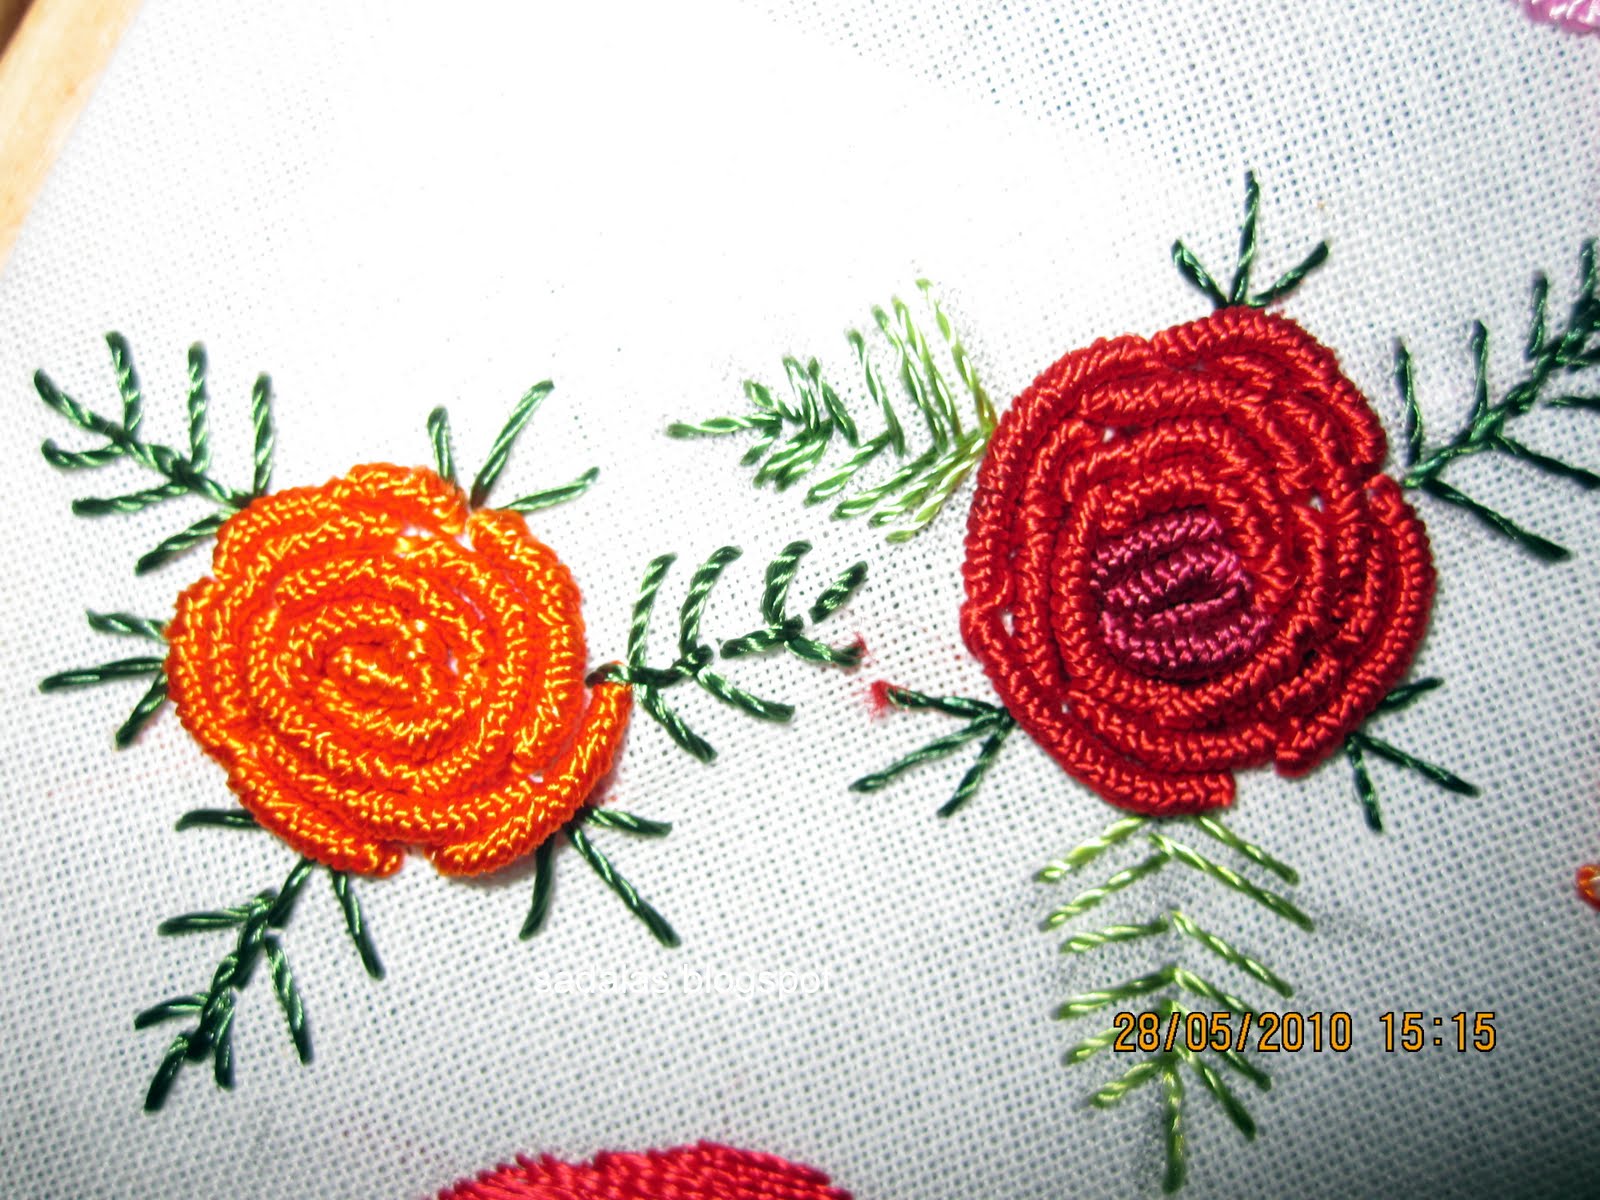 Embroidery Designs, Embroidery Thread and Embroidery Supplies